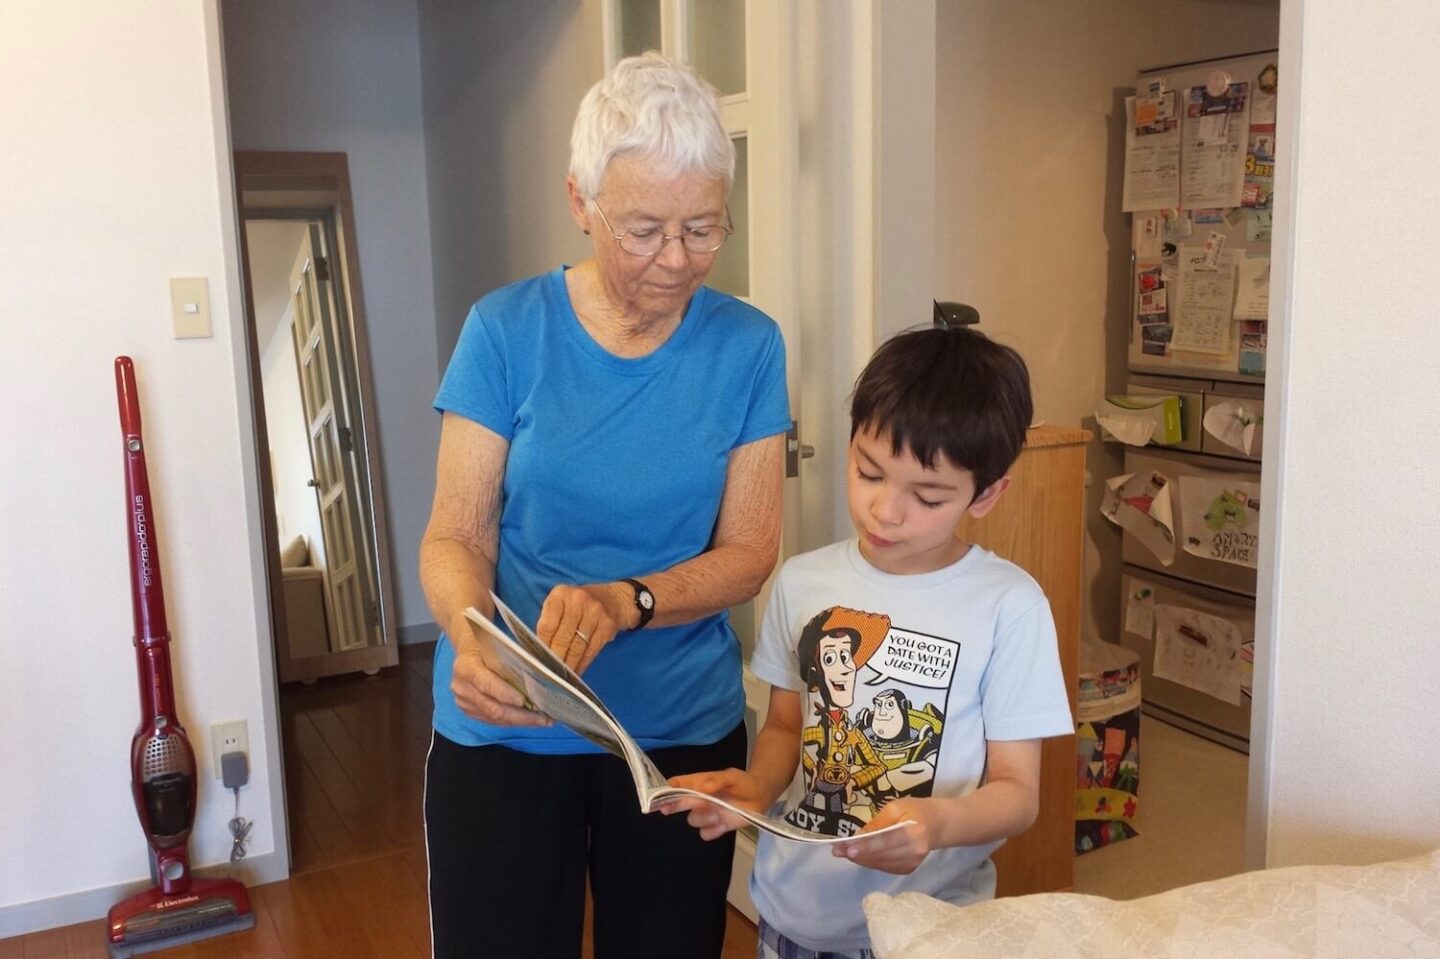 A grandmother and grandson looking at a book